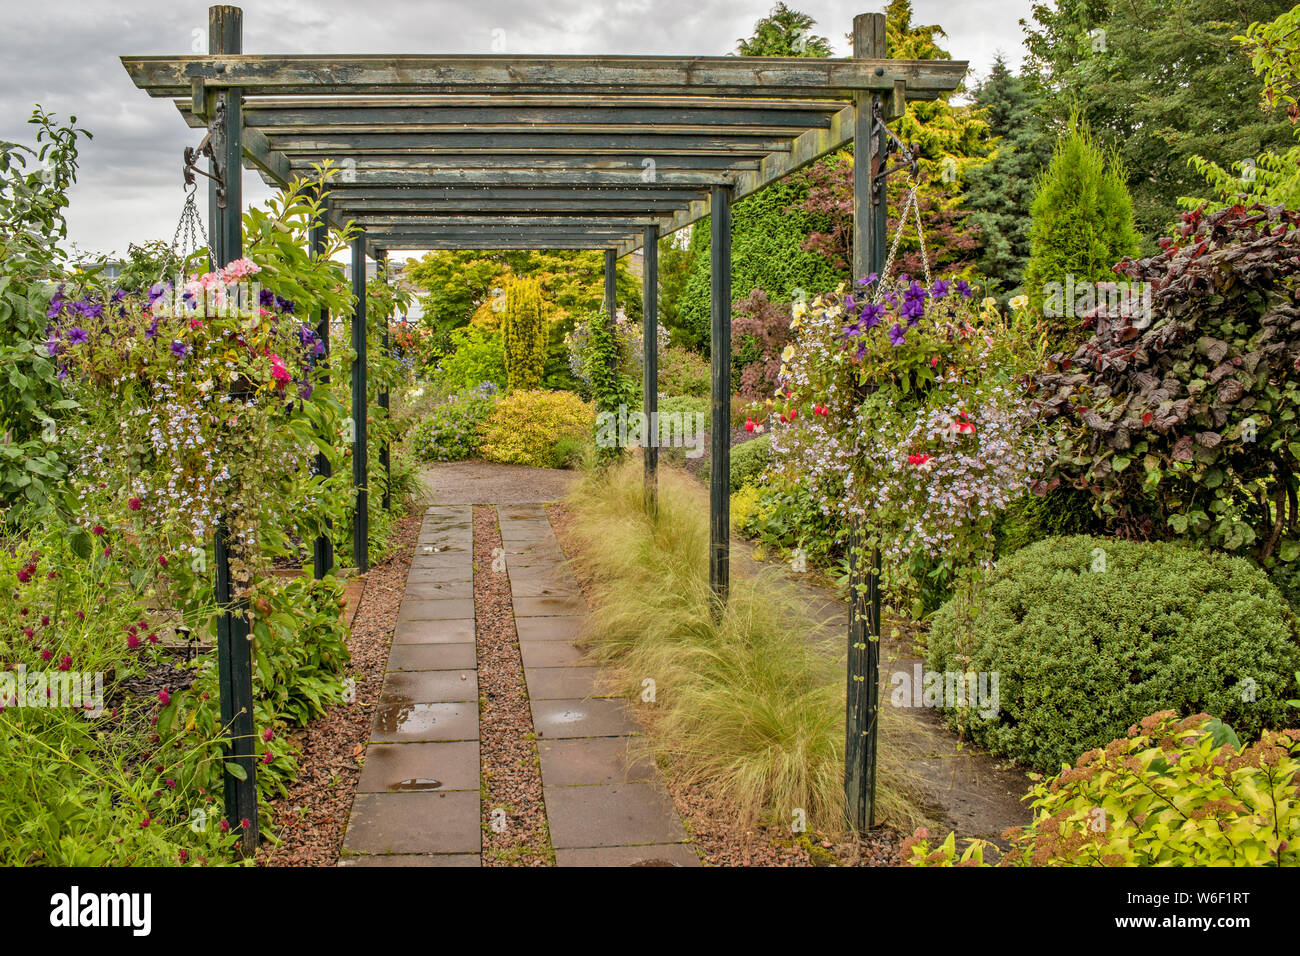 INVERNESS SCOTLAND THE BOTANIC GARDENS PERGOLA WITH HANGING BASKETS OF COLOURFUL FLOWERS AND GRASSES AT THE BASE Stock Photo